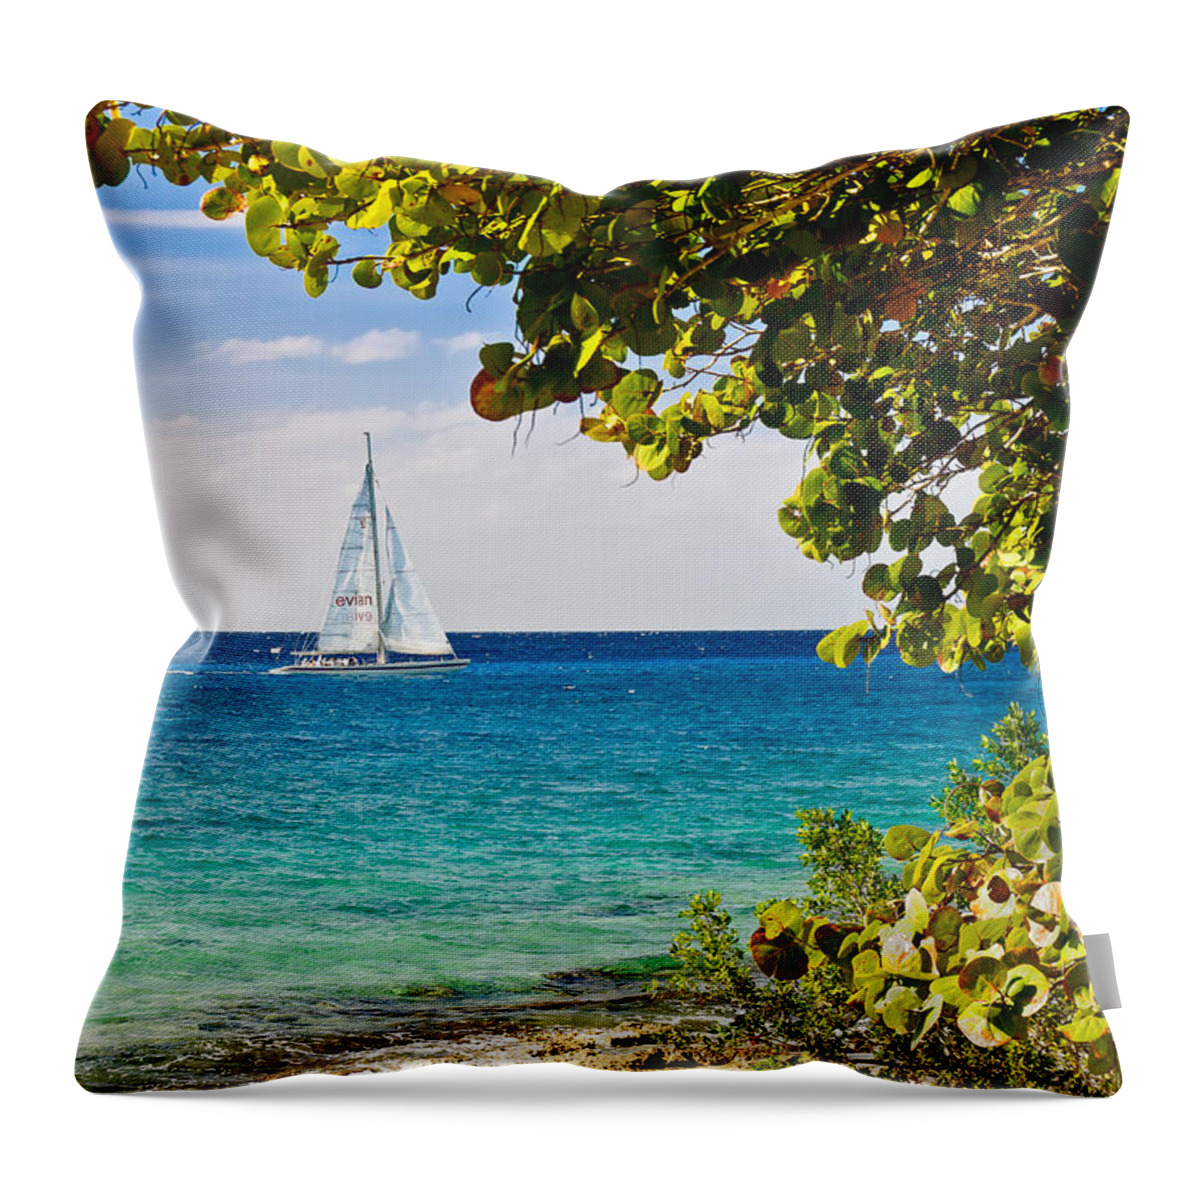 Cozumel Throw Pillow featuring the photograph Cozumel Sailboats by Mitchell R Grosky